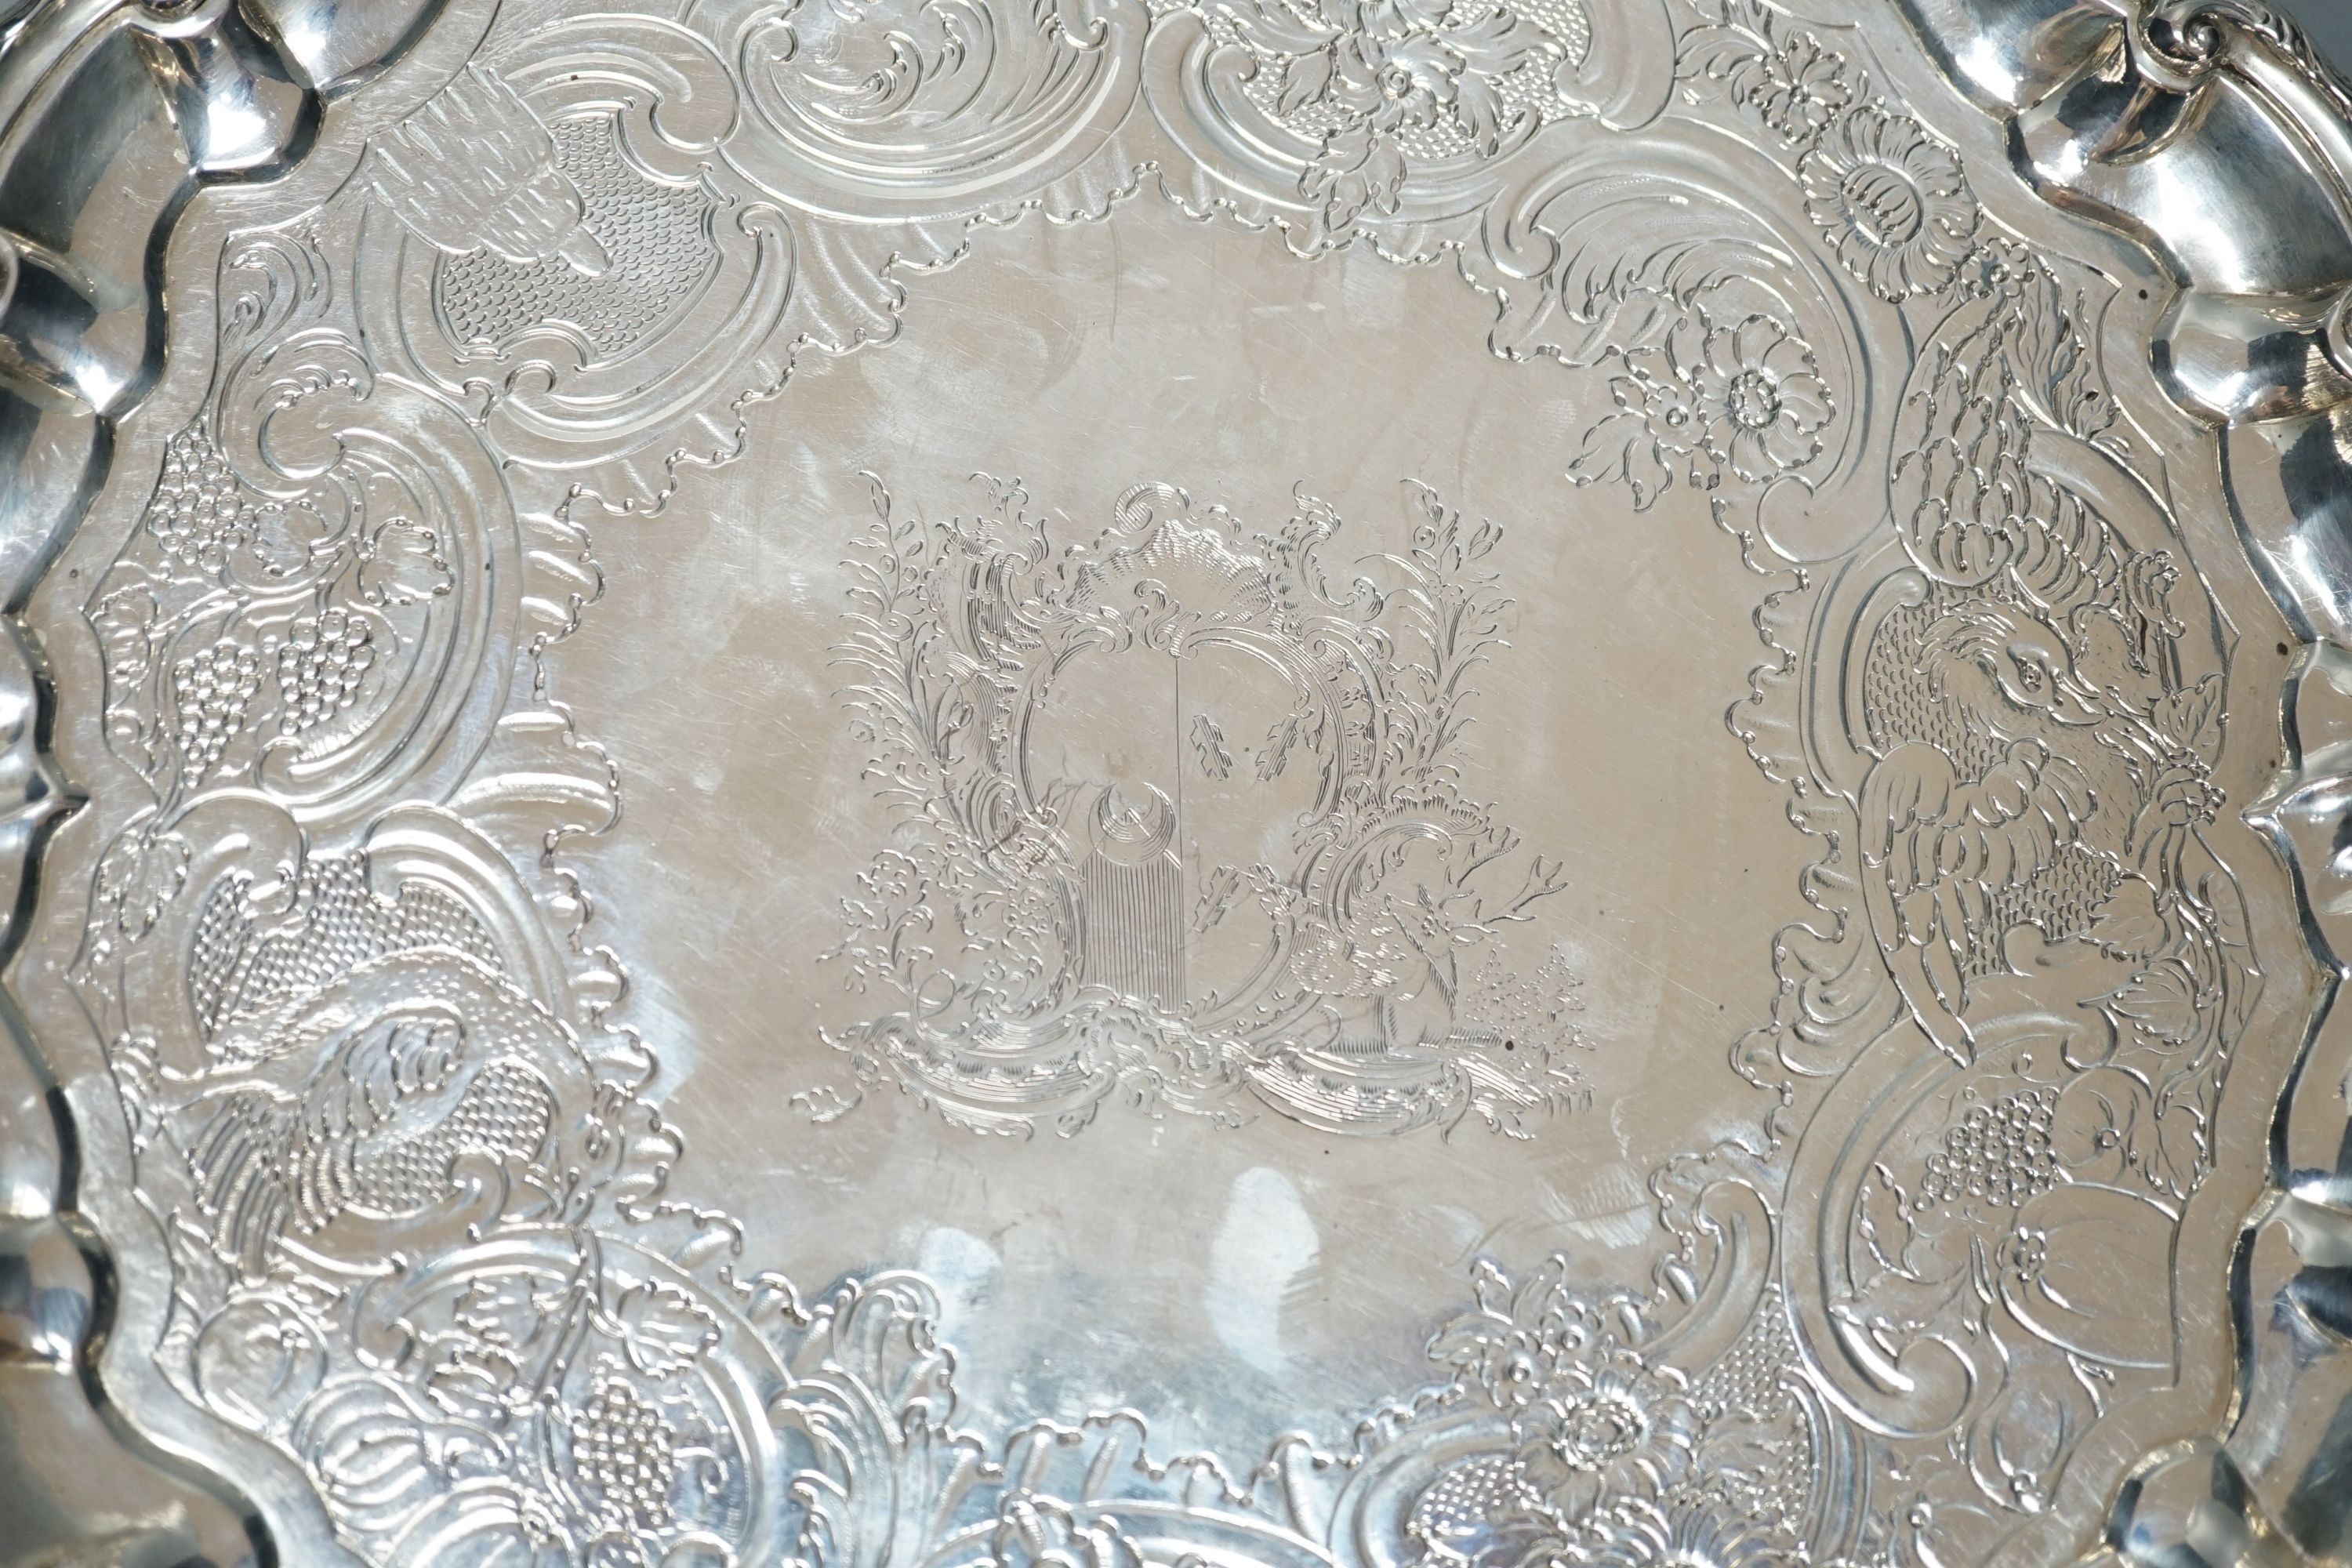 A George II silver salver, Hugh Mills, London, 1748, with later engraved decoration, 28.6cm, 25.5 oz (a.f.).